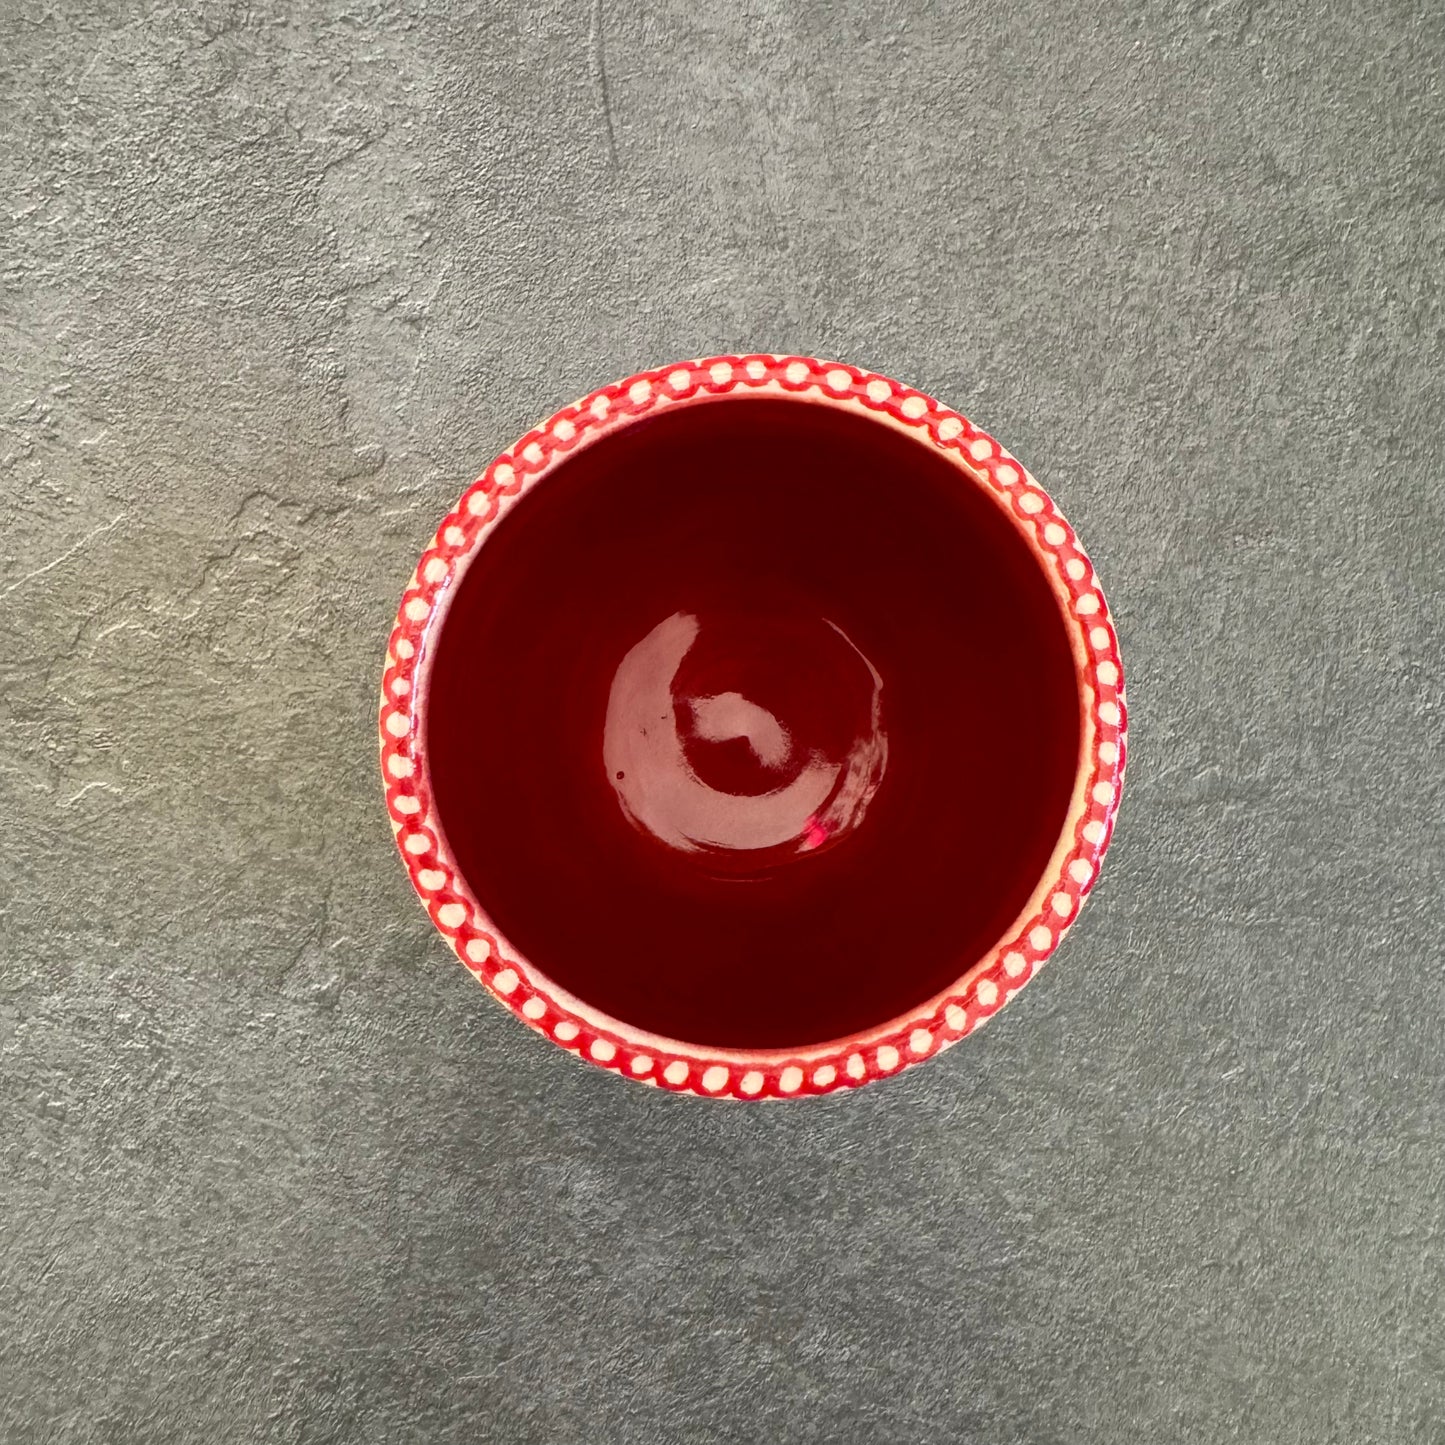 Round Cup with Red Heart design